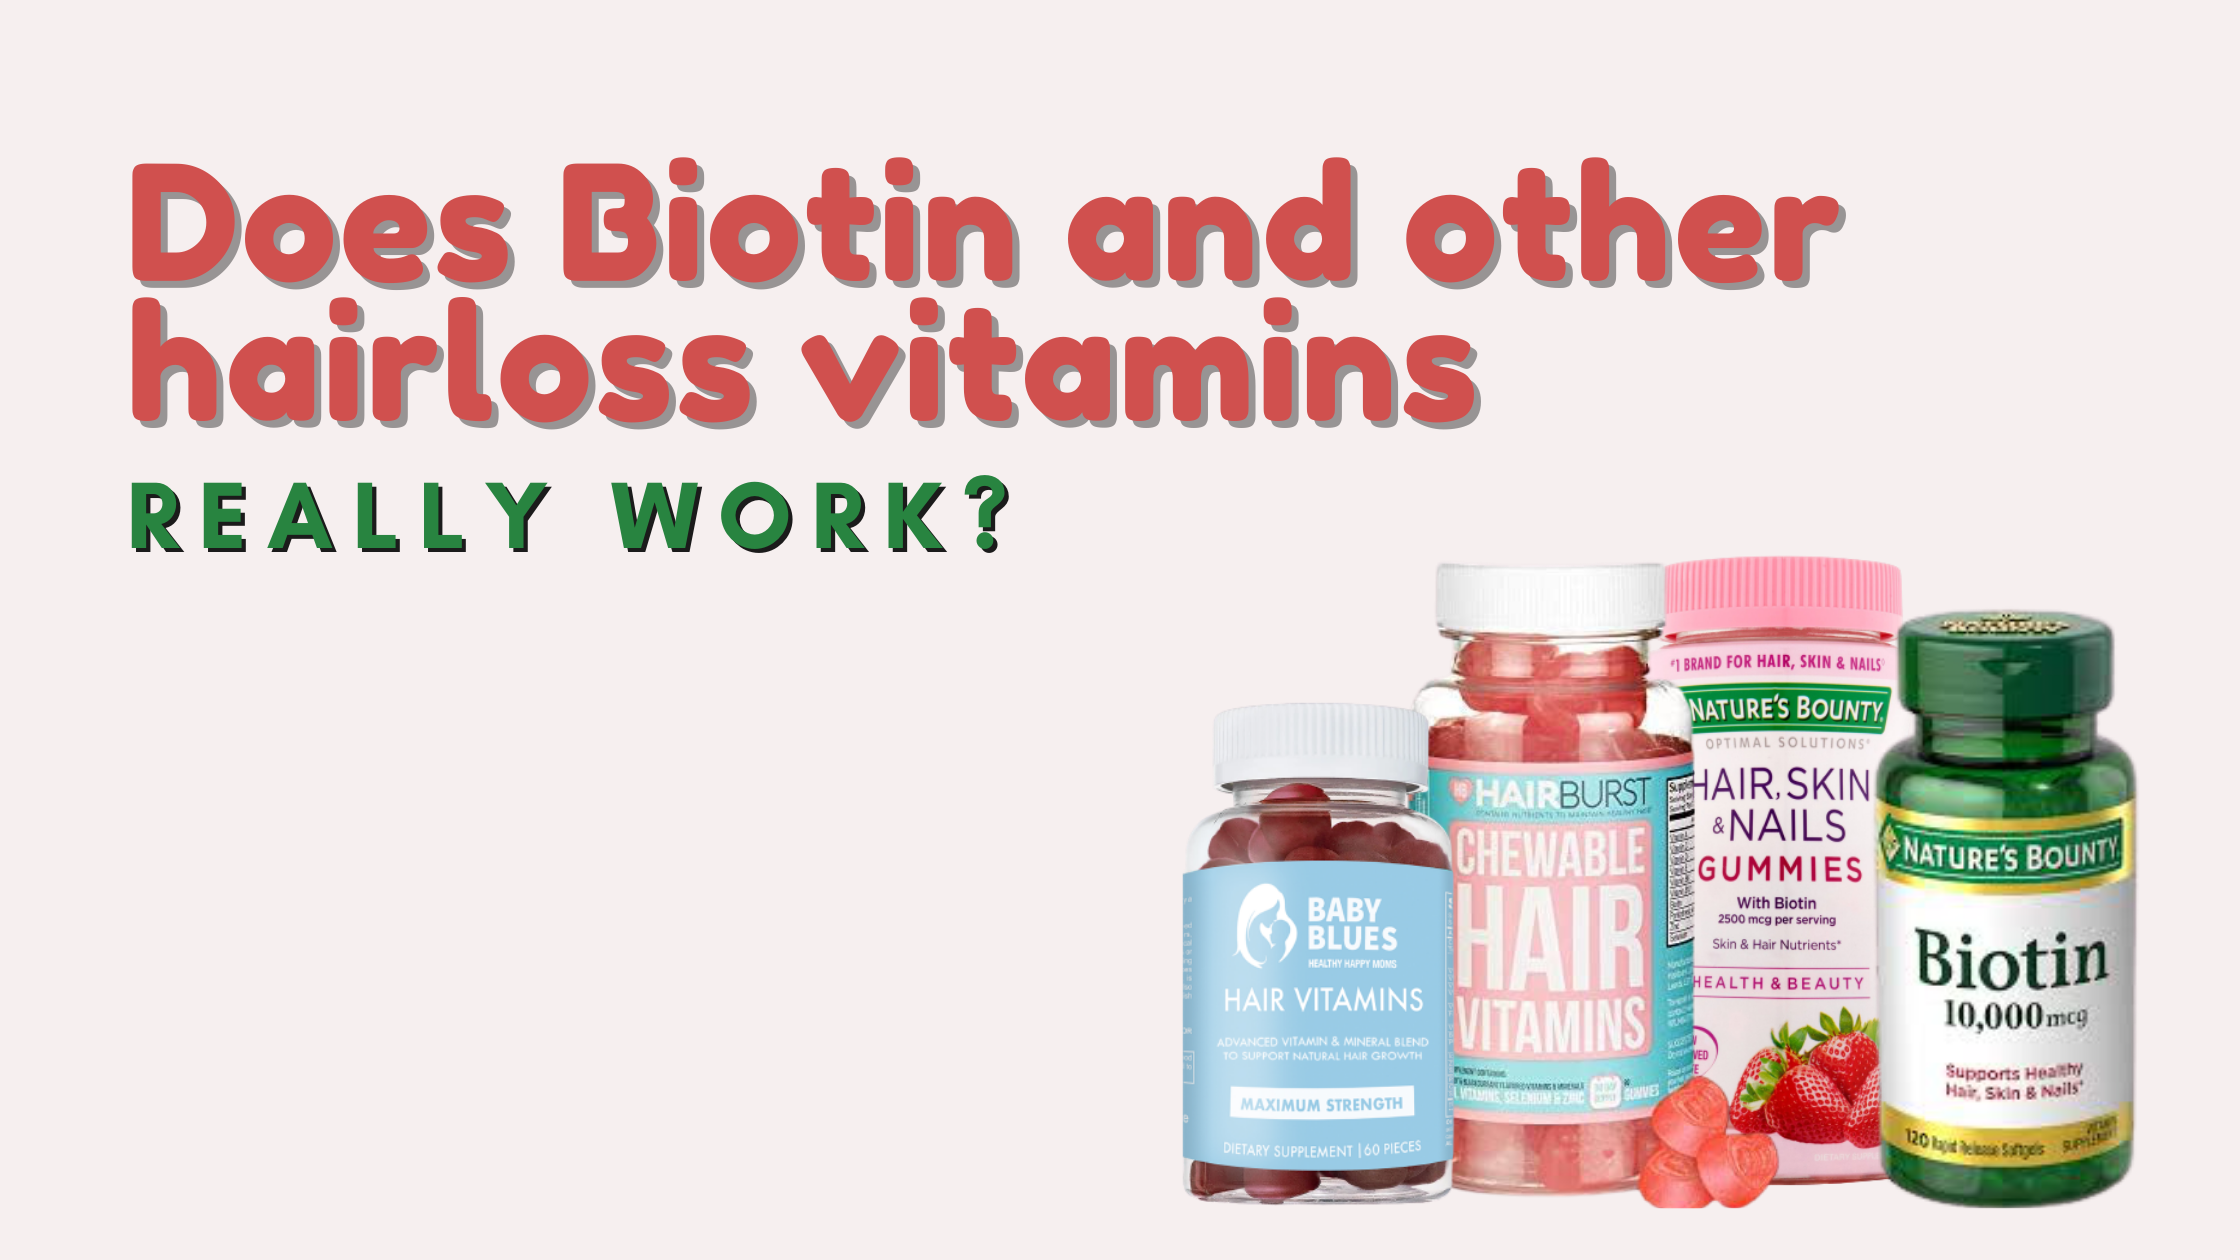 Does Biotin and other hair loss vitamins really work